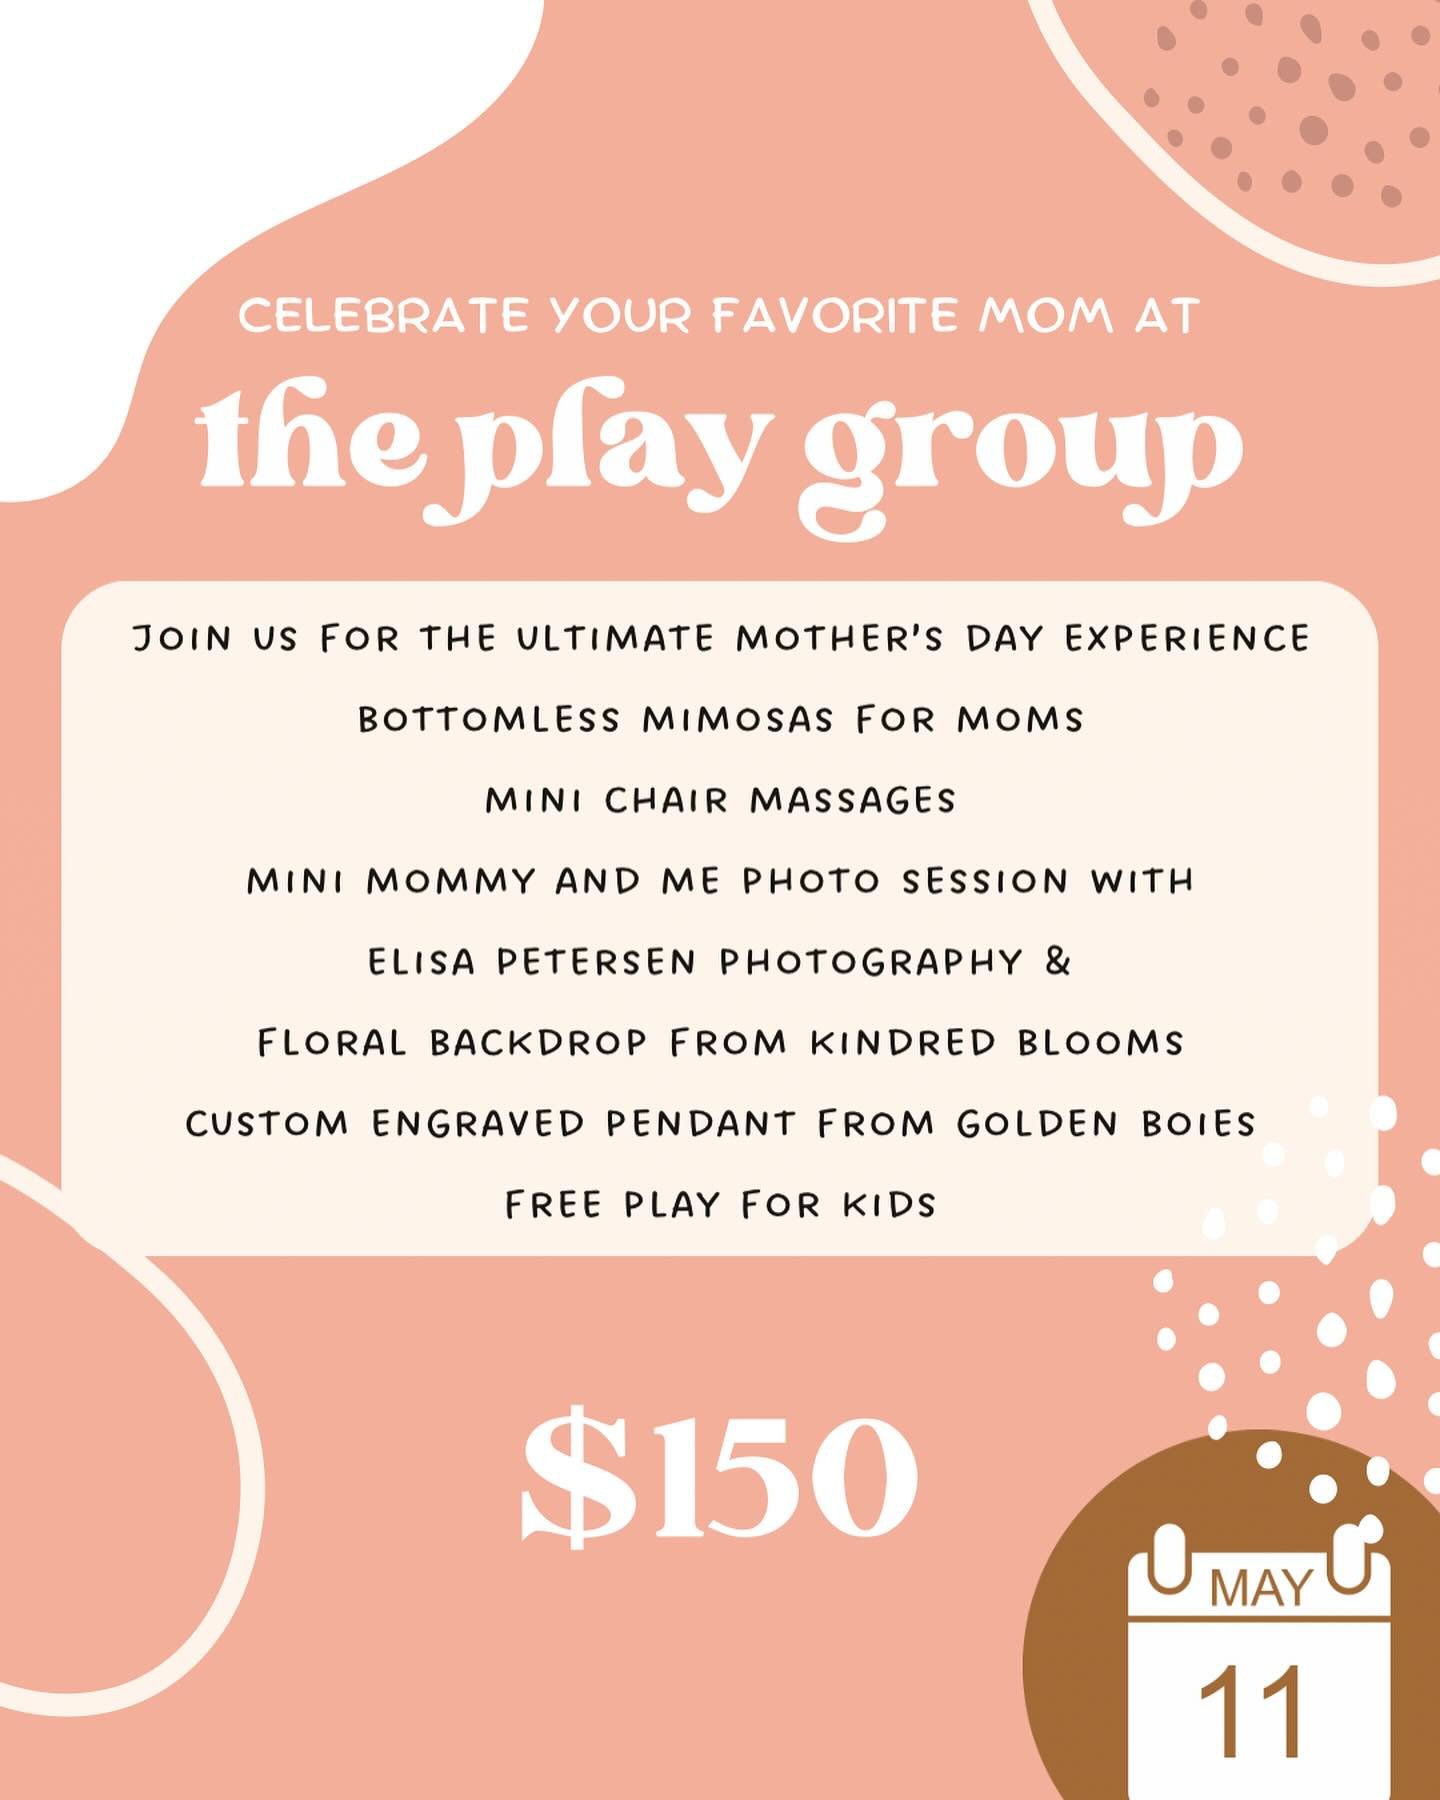 Our Mothers Day event is in less than two weeks. Swipe for all the details and send to your partner&hellip;you deserve this! Spots are limited, so book yours today! Link to book in bio.